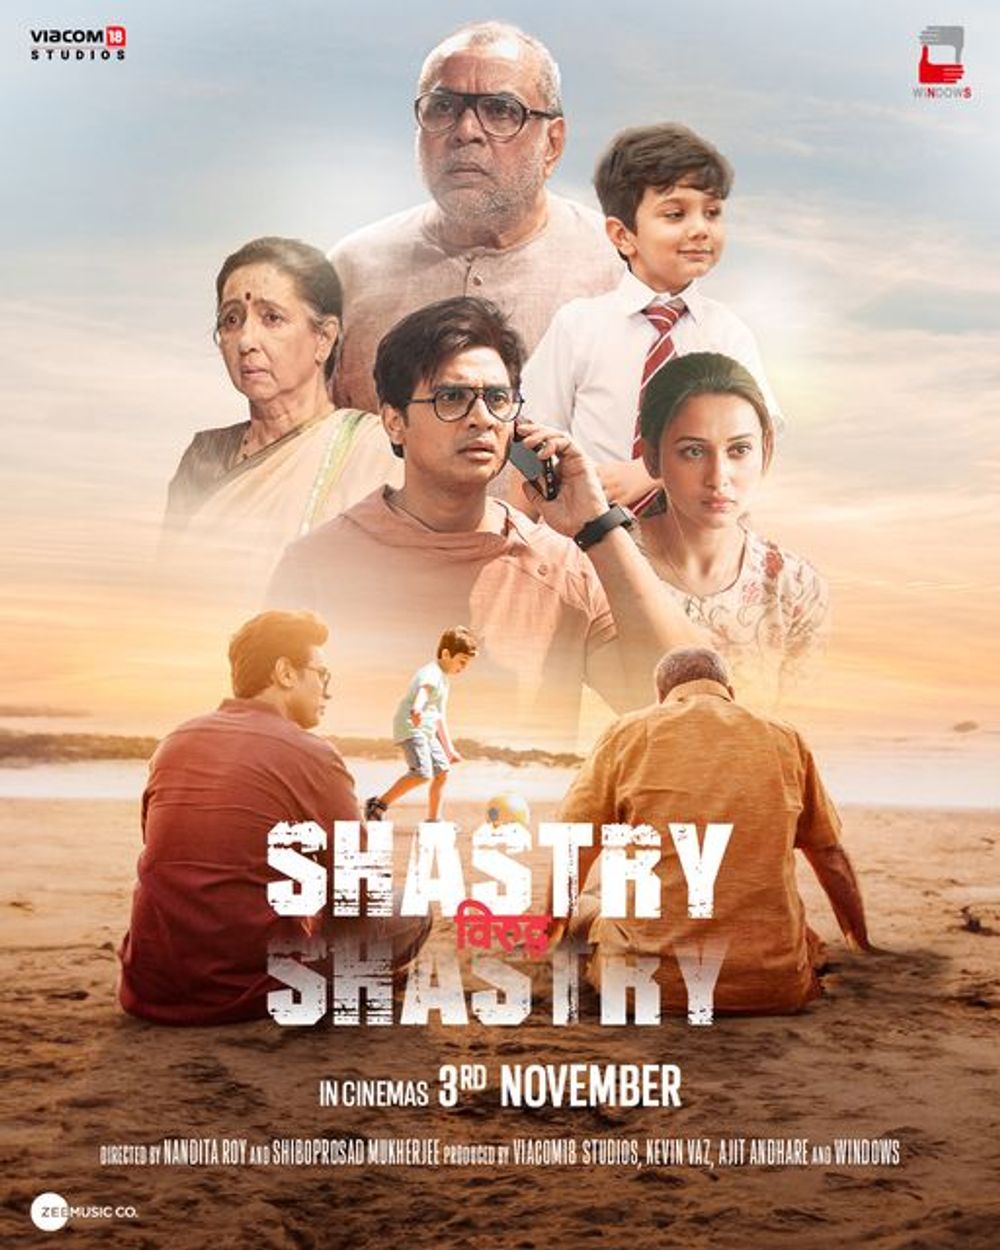 Shastry Virudh Shastry Movie Review